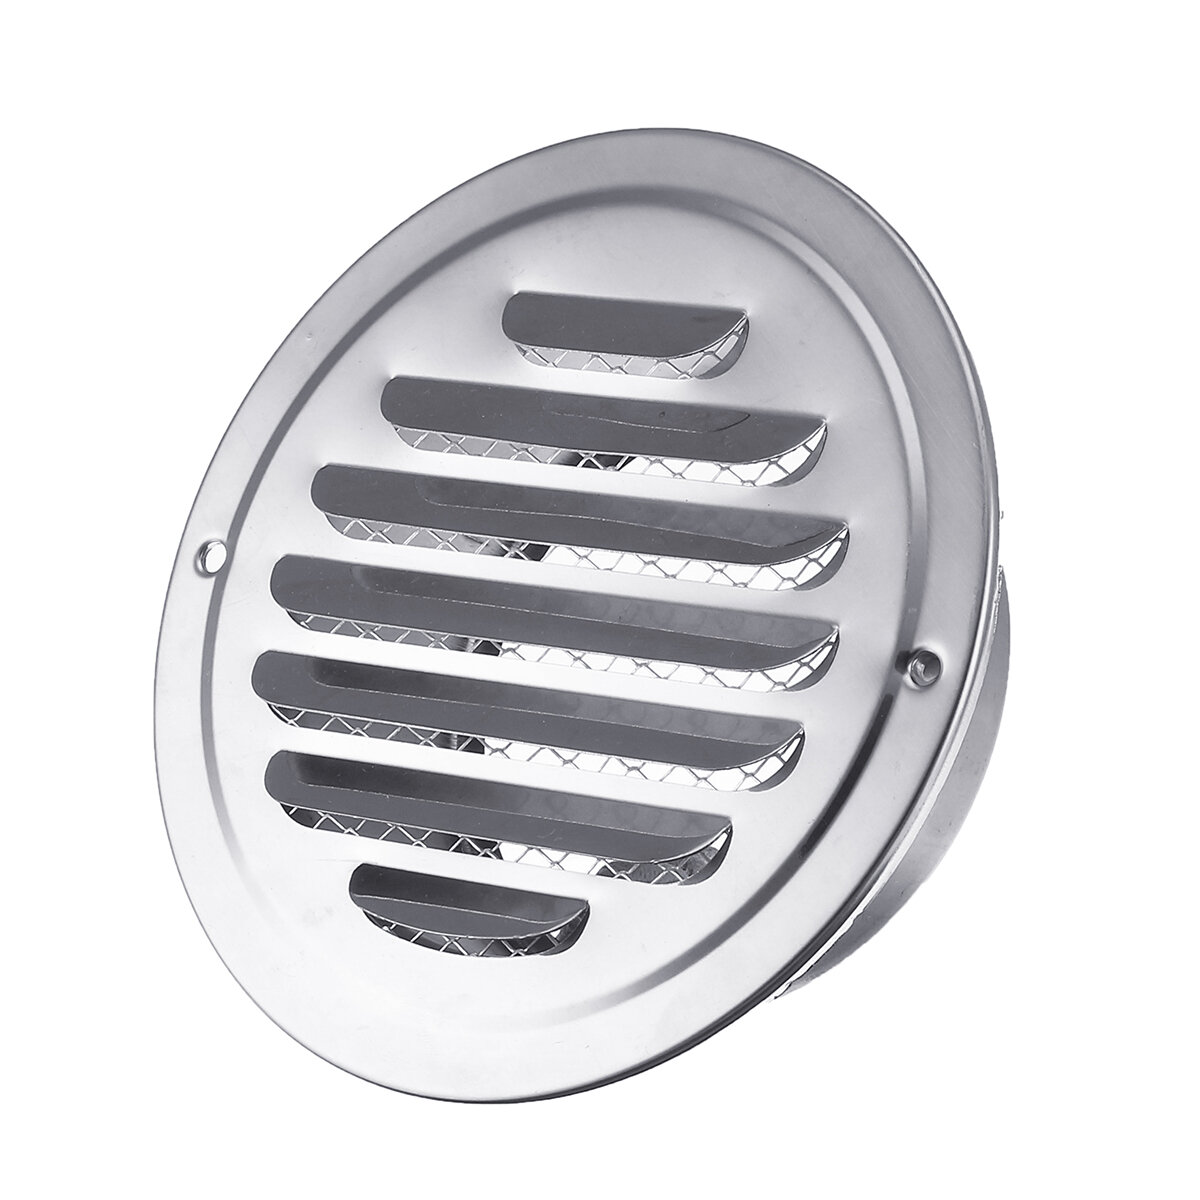 

Stainless Steel Round Circle Air Vent Grille Ducting Ventilation Cover Grill Diesel Grill Headrest Cover Air Bbq Cover S